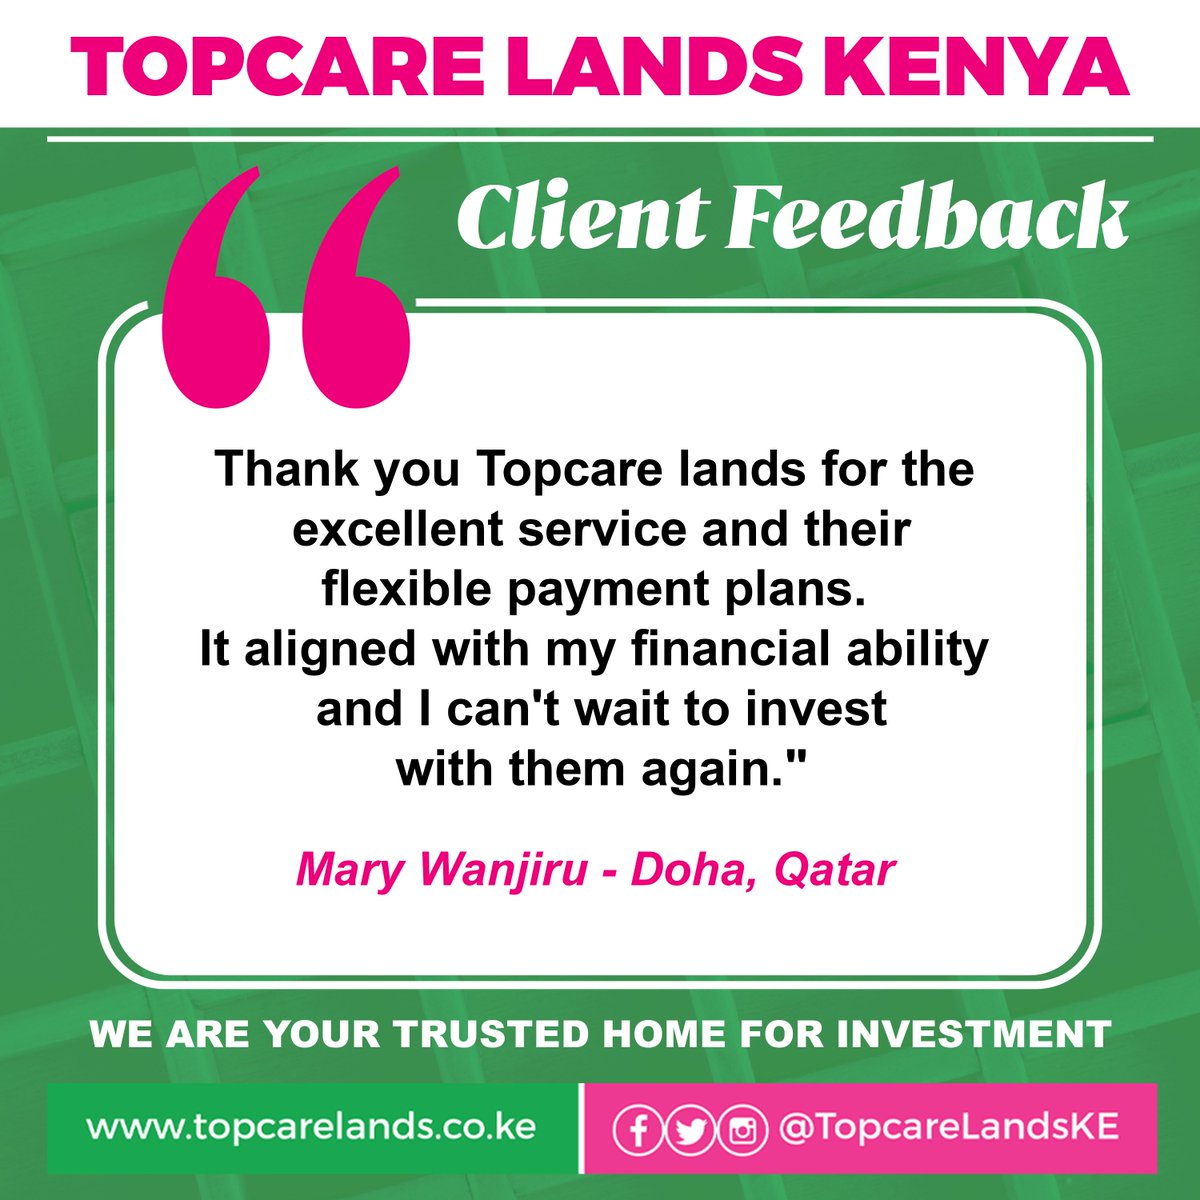 To our diaspora people, our services are top notch. Mary amejinyakulia title deed all the way from Doha, Qatar. Get yours today courtesy of Topcare Lands Kenya. We are built on Trust!
#BuiltOnTrust #topcaredelivers #diaspora